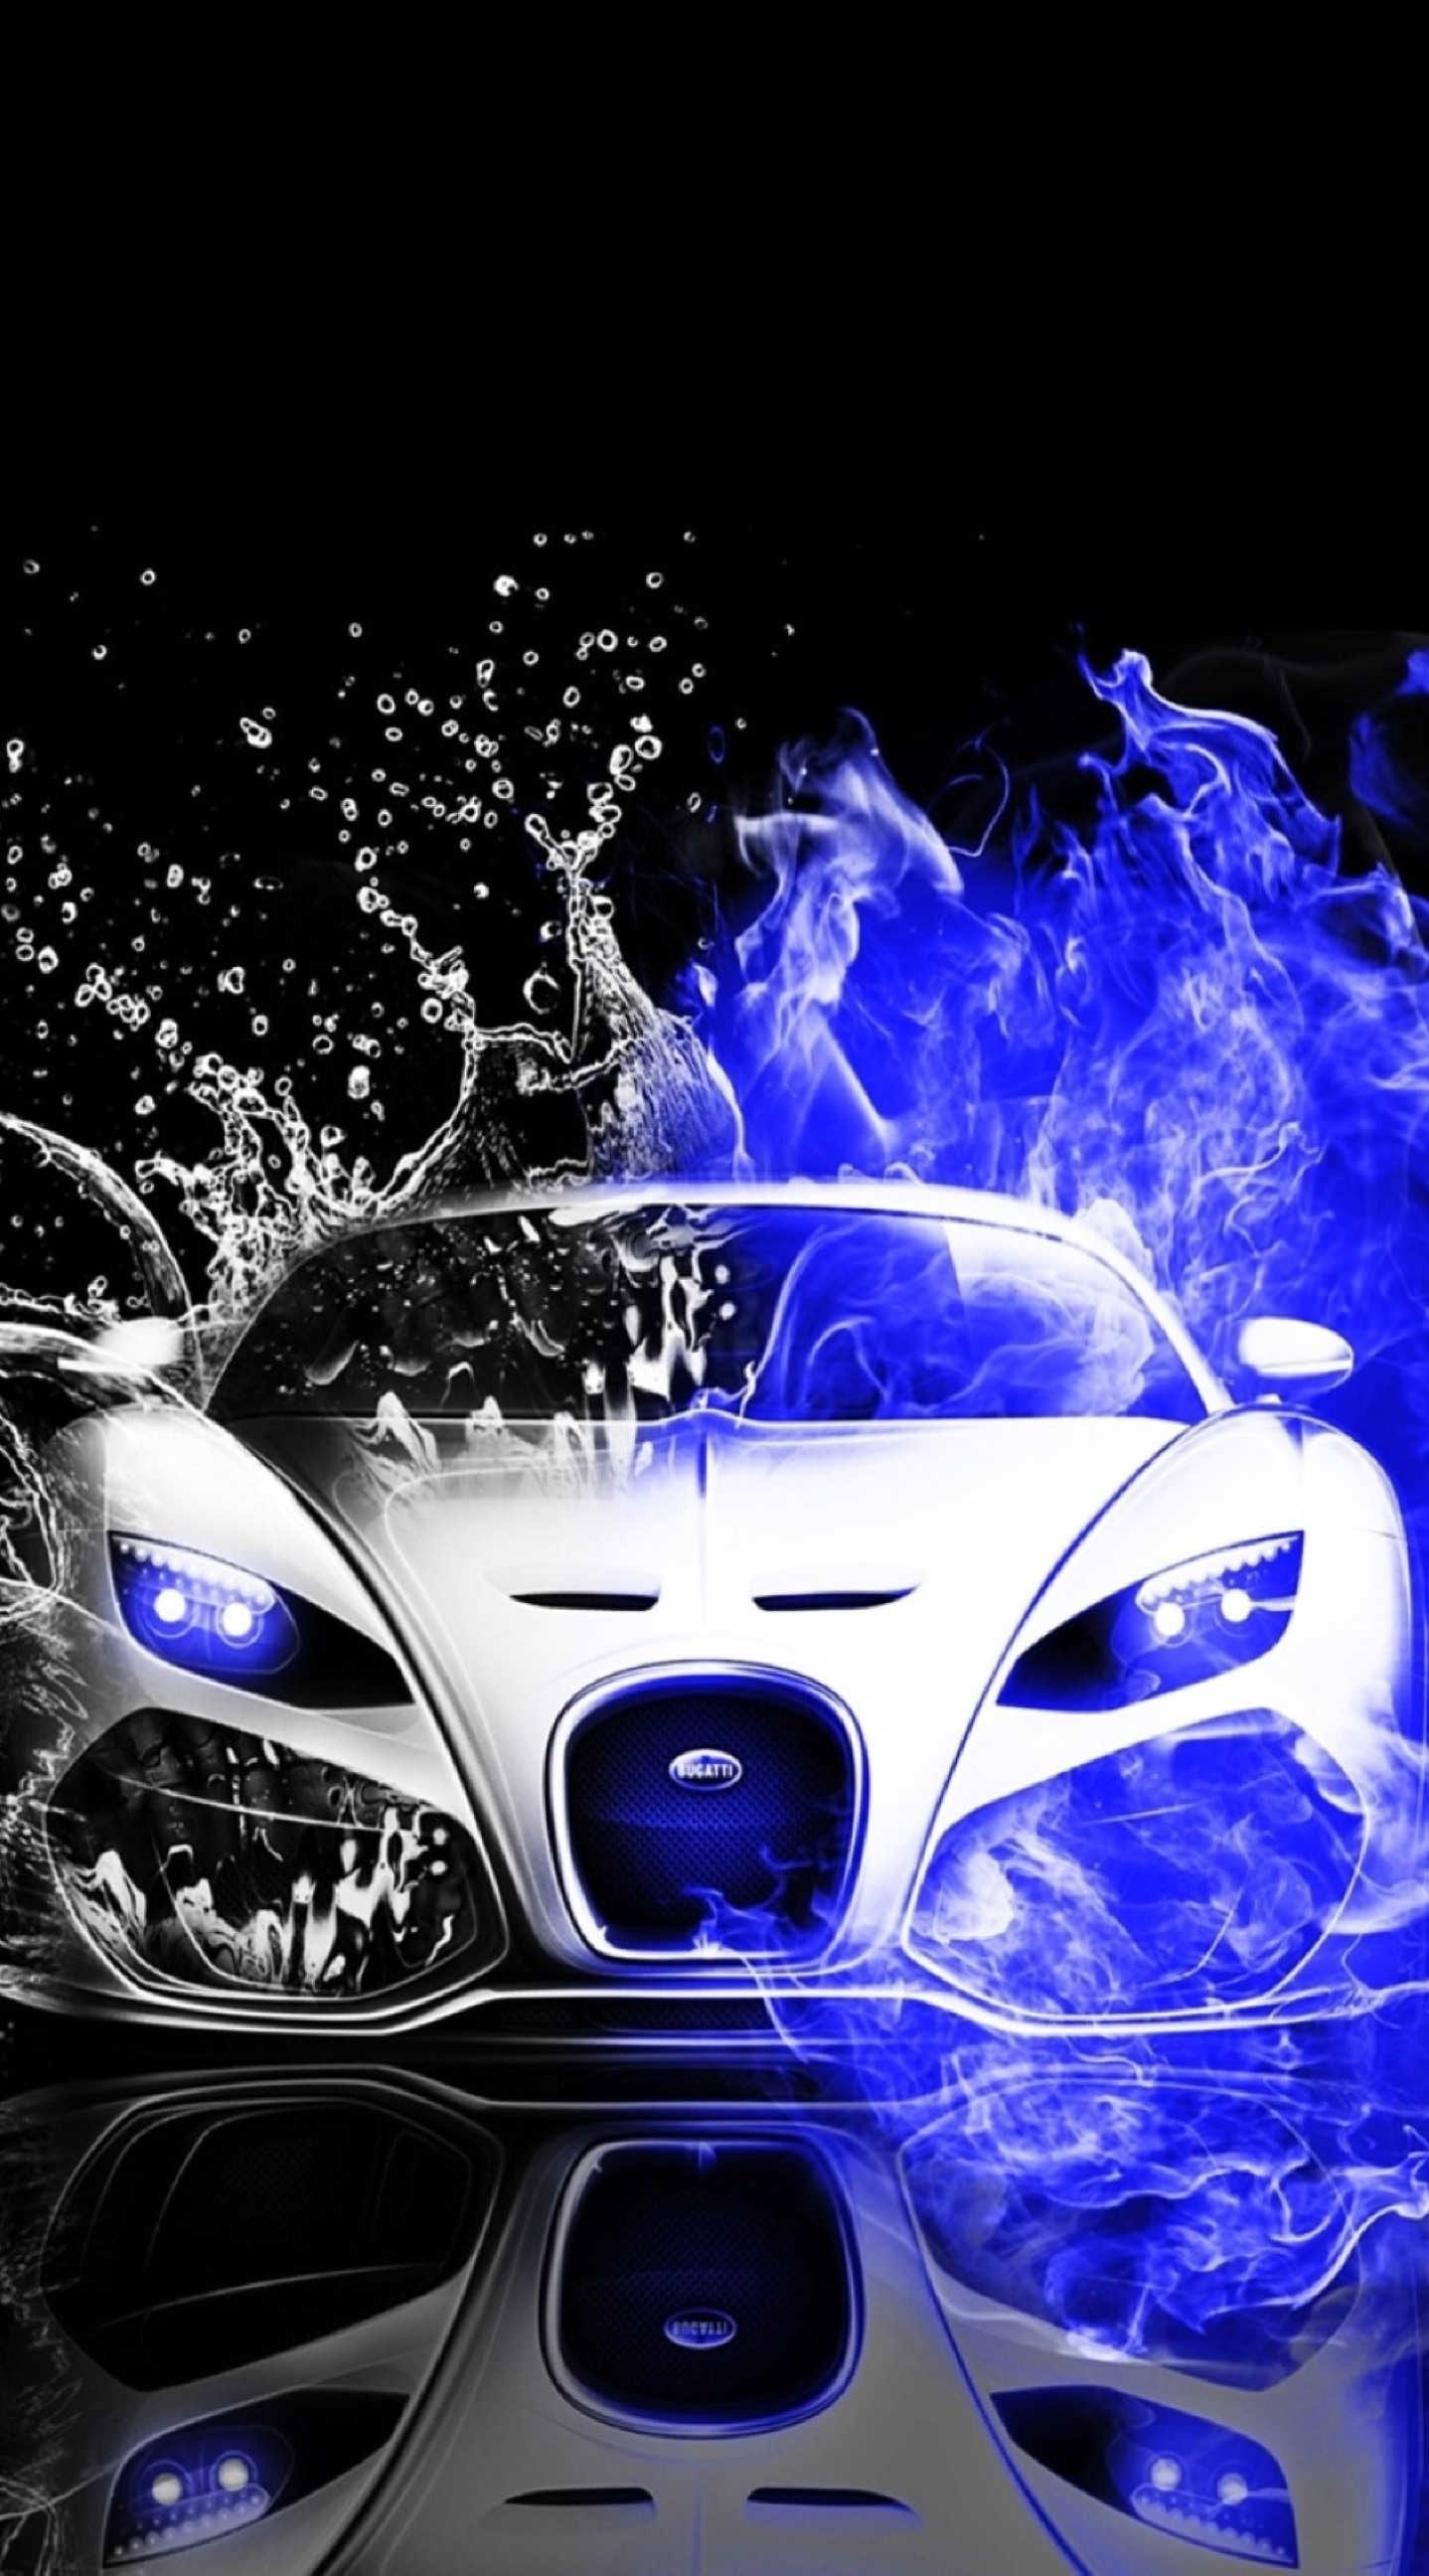 38 Cool Cars Wallpapers for iPhone on WallpaperSafari  Car wallpapers Car  iphone wallpaper Red sports car